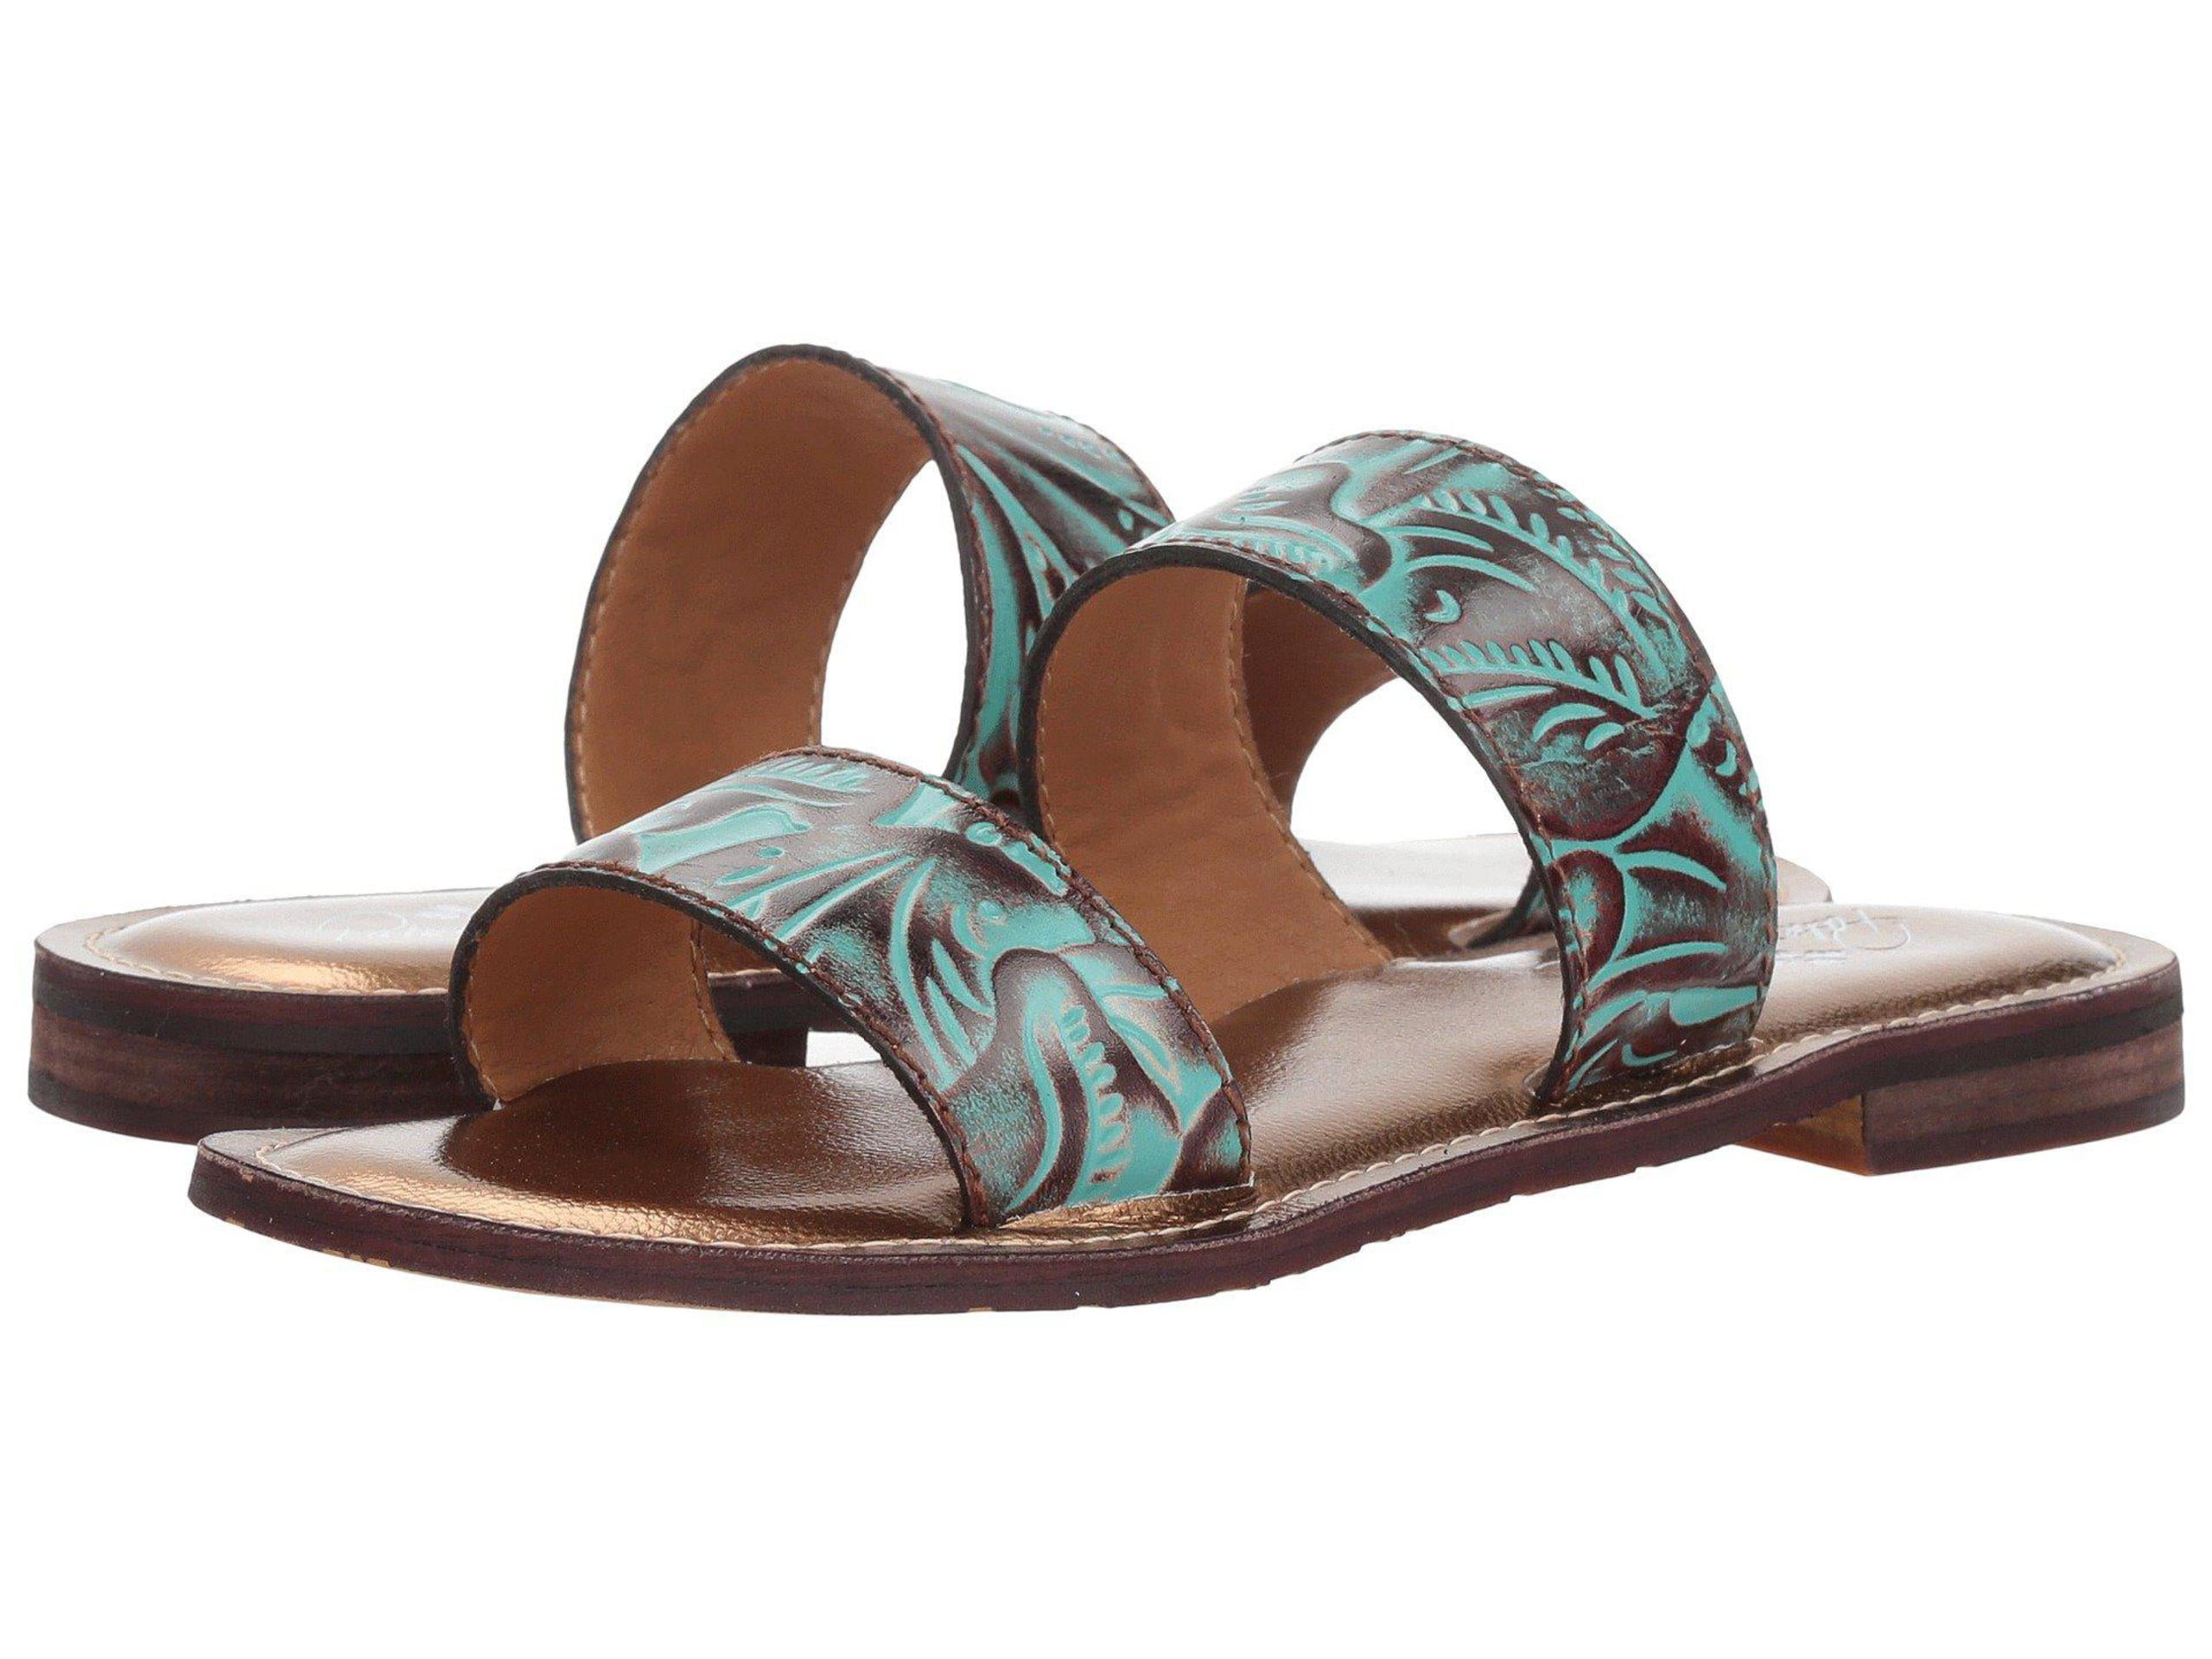 Patricia Nash Womens Flair Leather Open Toe Casual Slide Sandals 